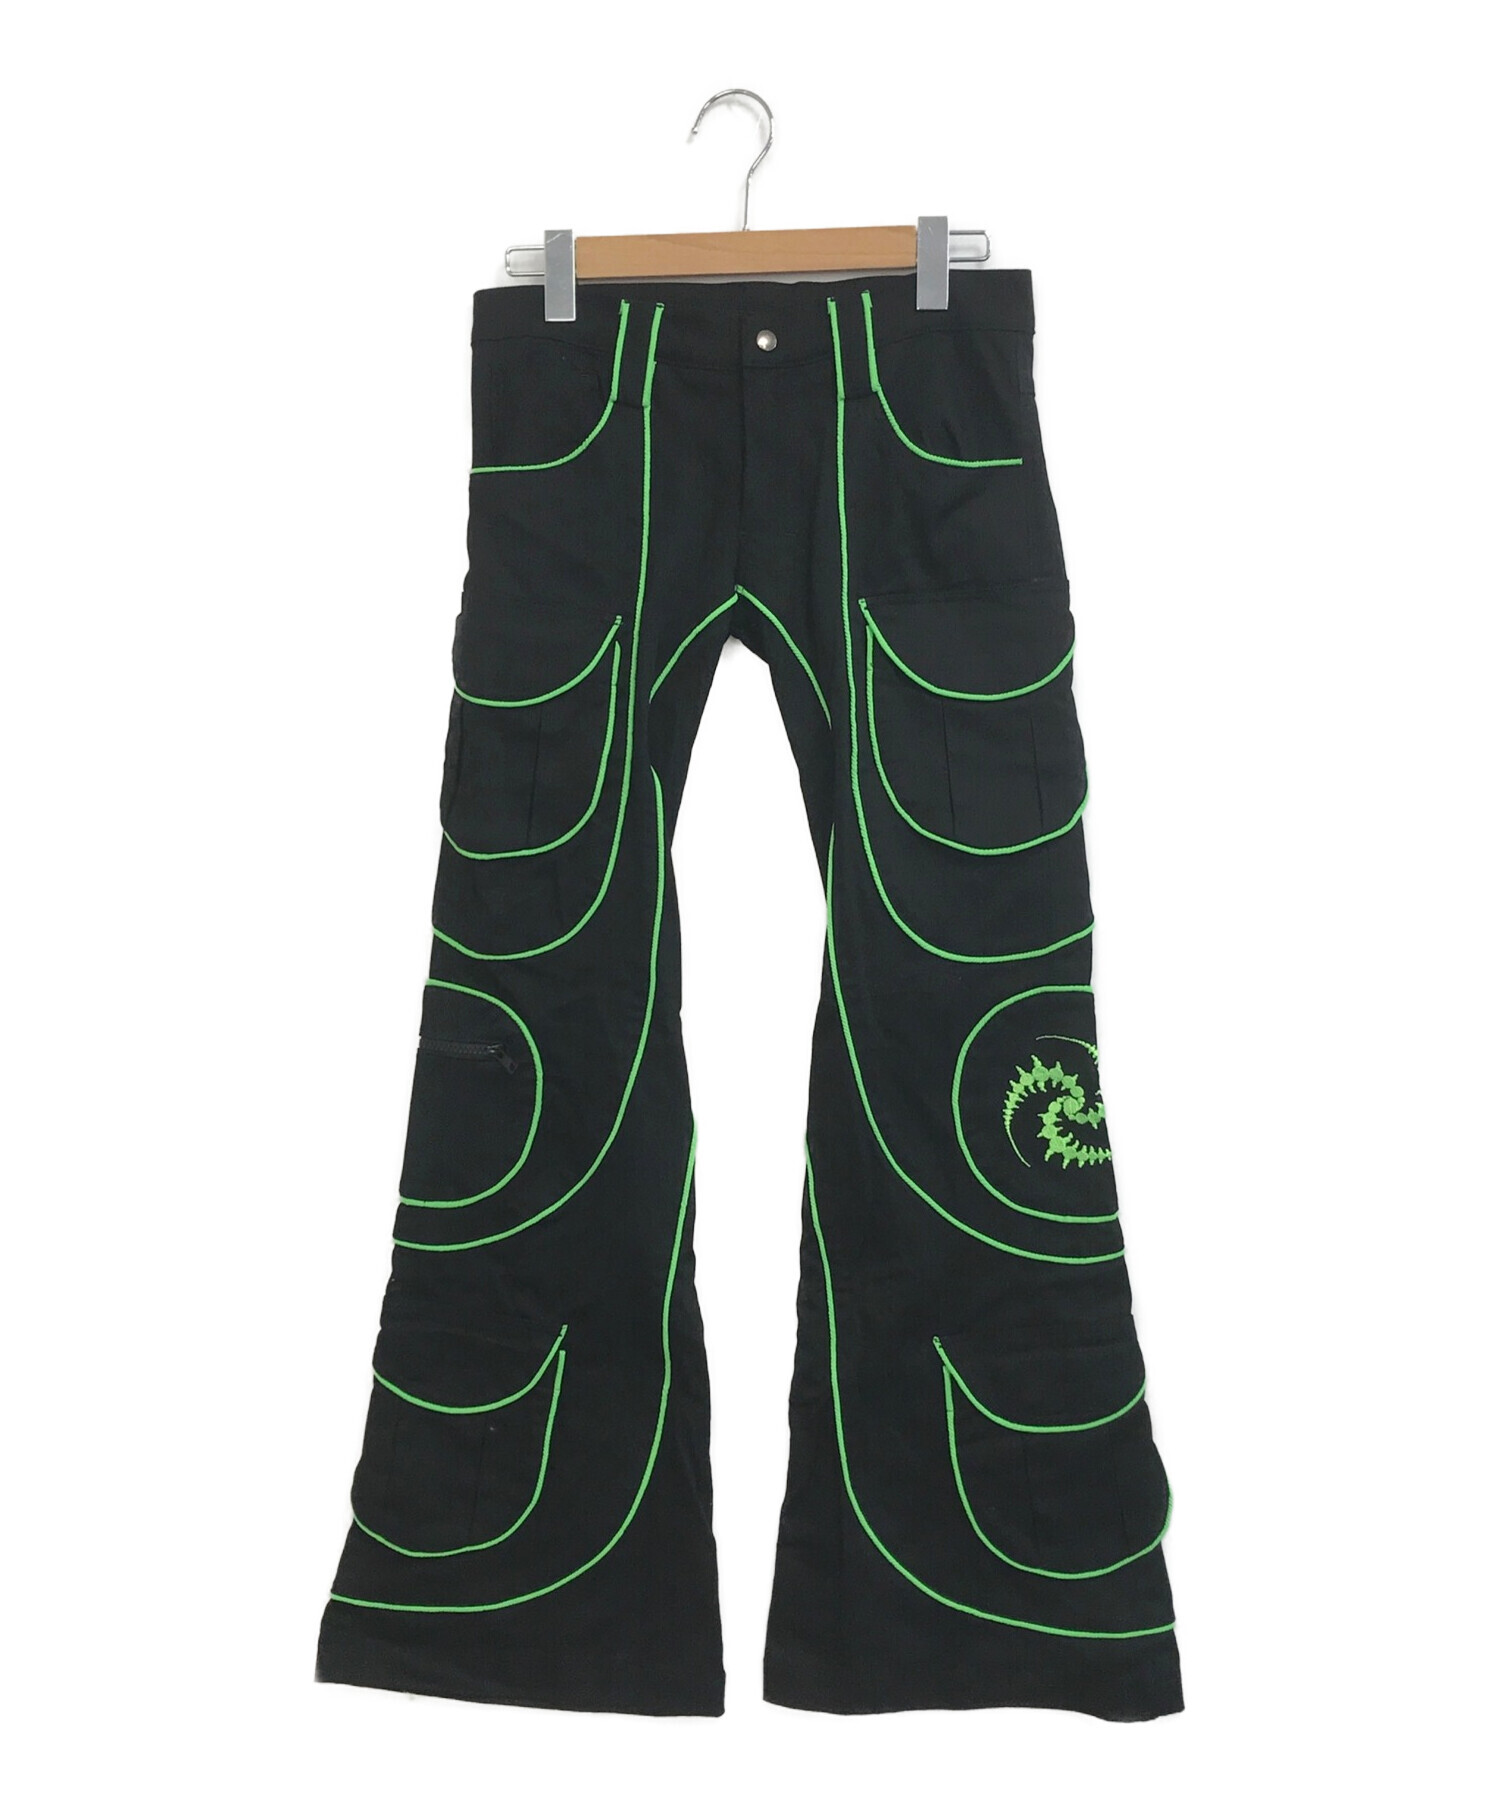 space tribe gimmick design pants